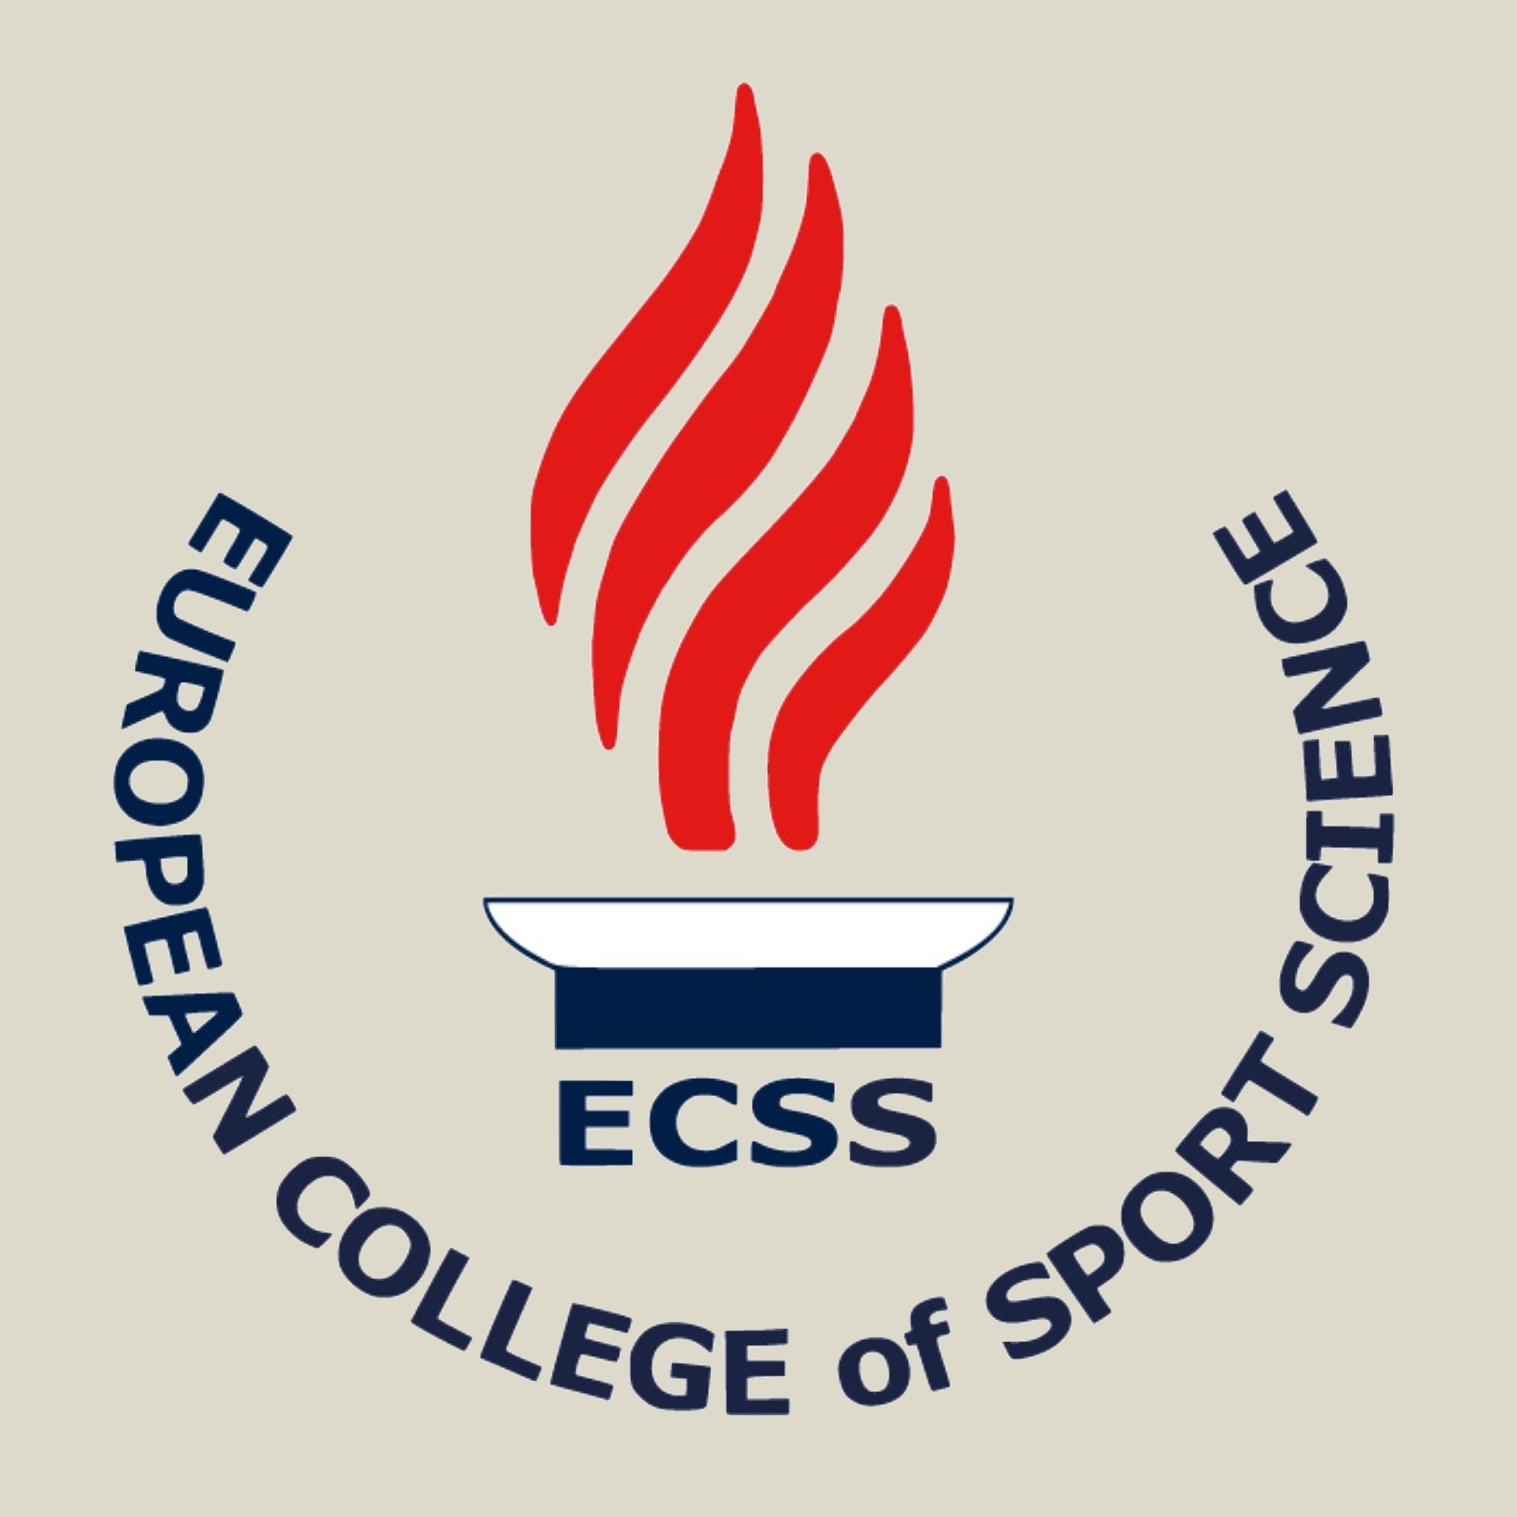 The European College of Sport Science